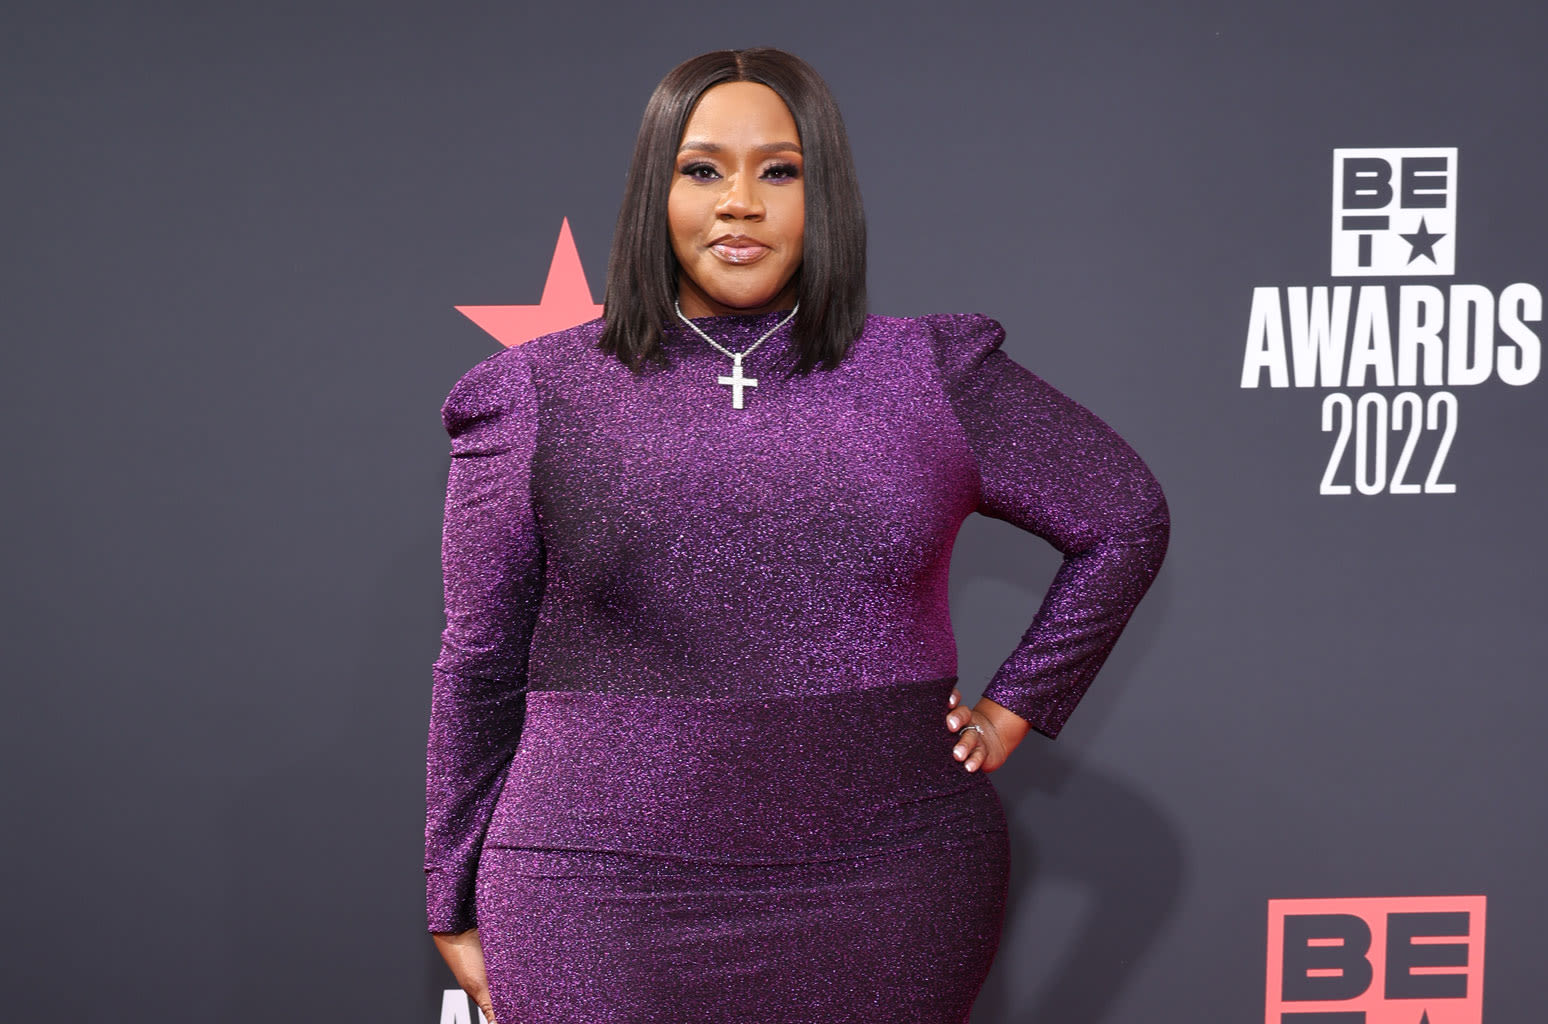 Kelly Price Clarifies Her ‘Prayer’ for Diddy After Backlash: ‘My Name Is Kelly, Not Jesus’